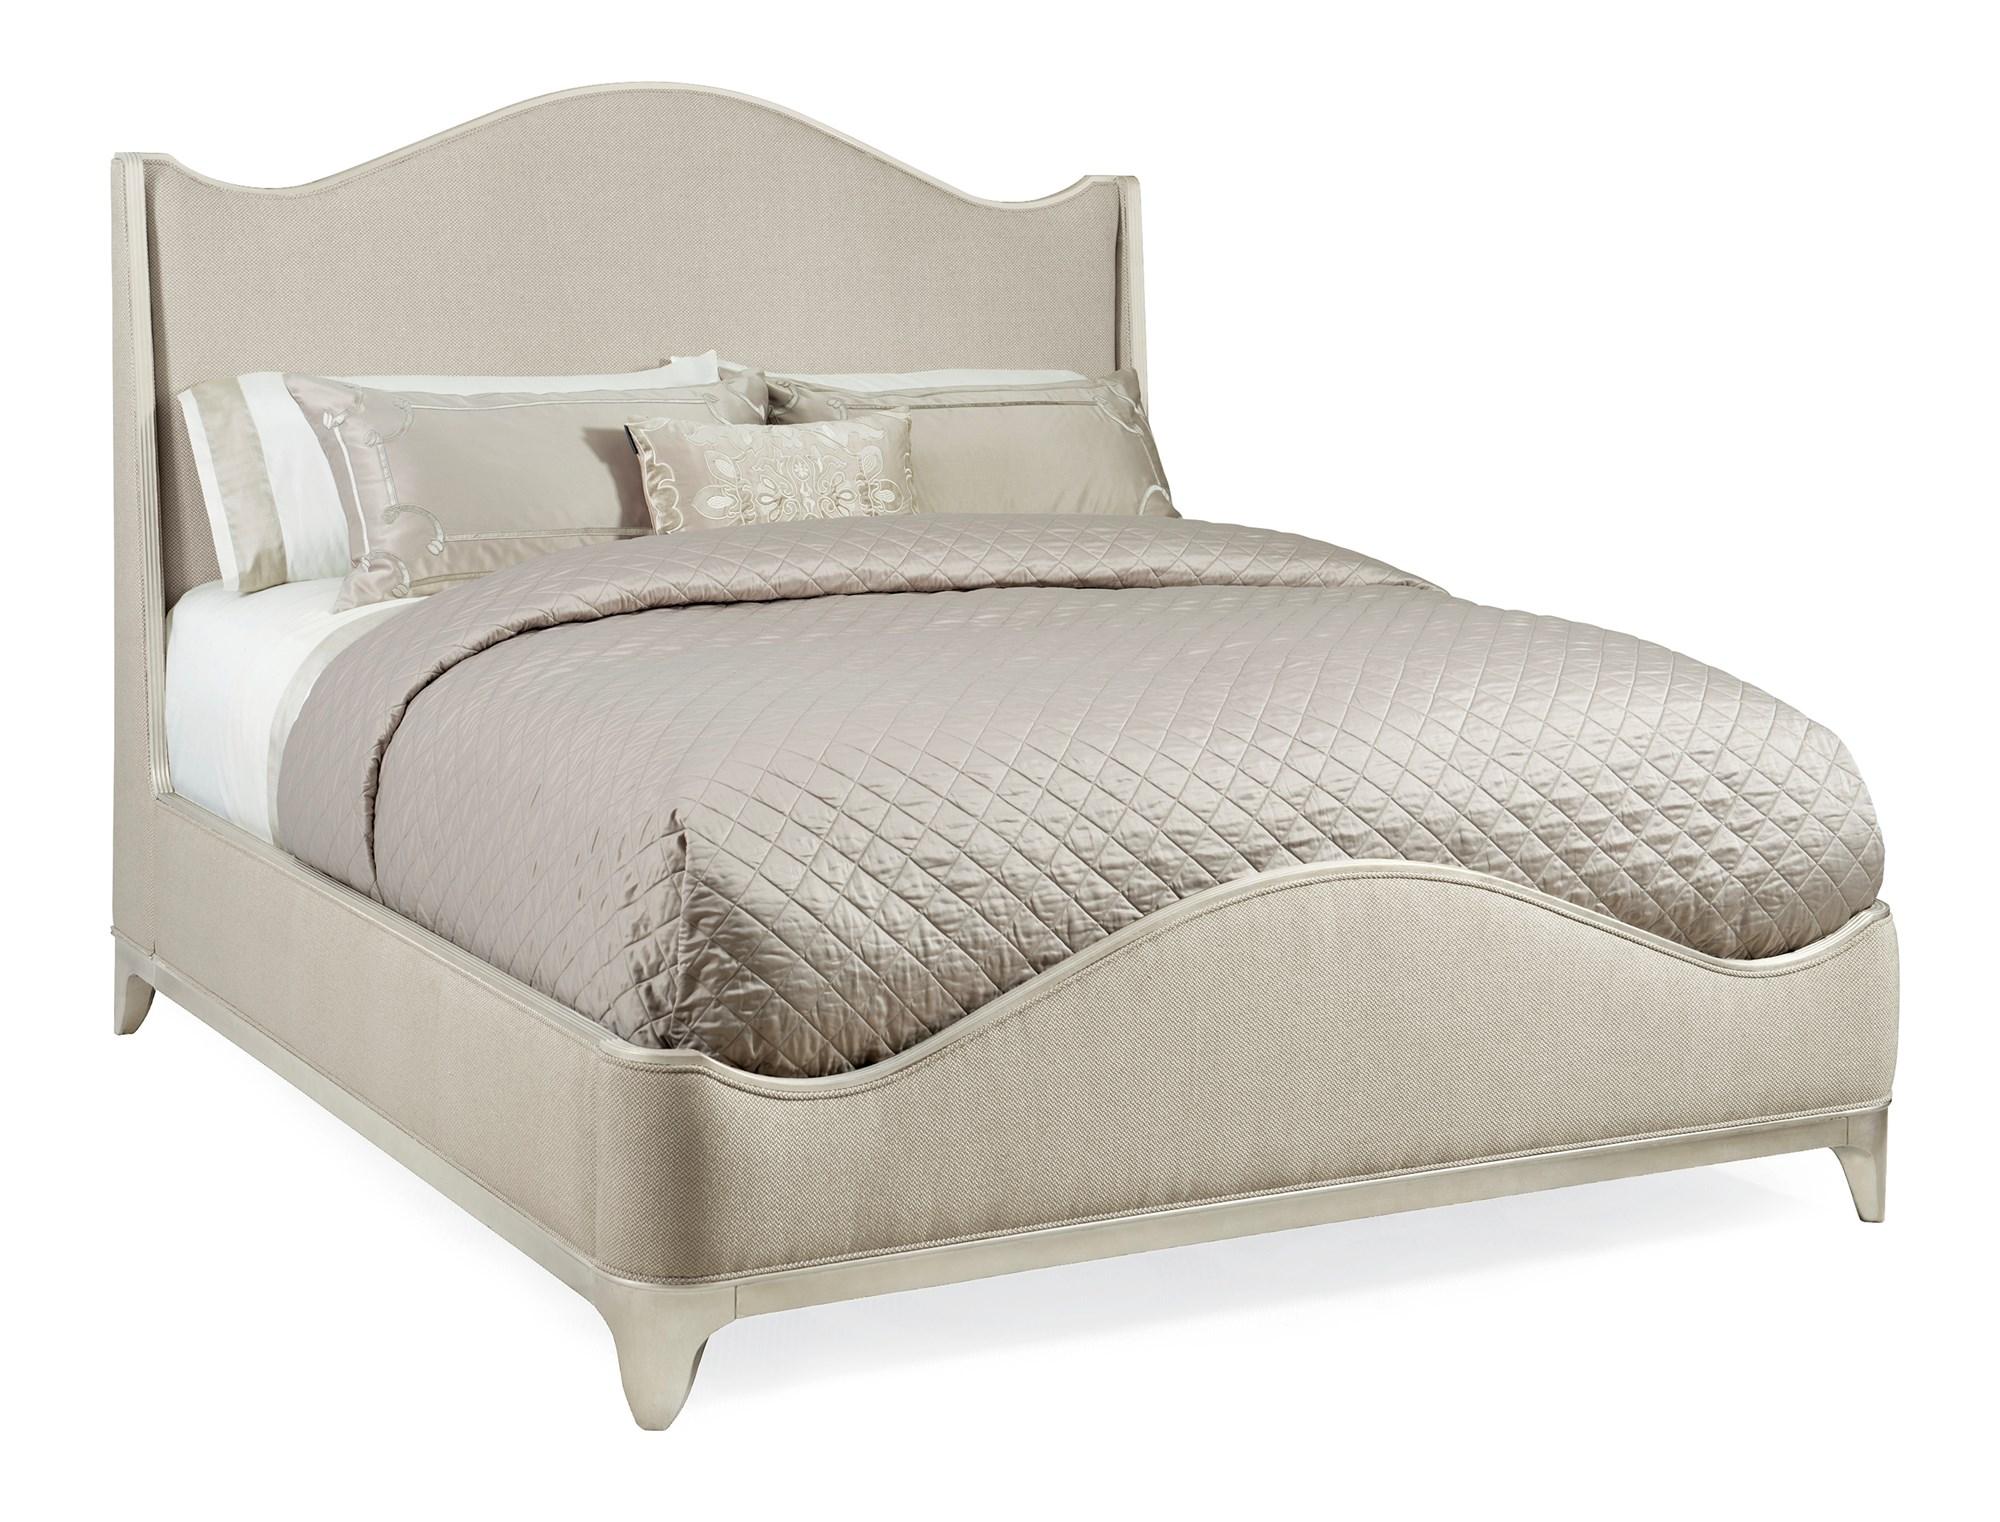 Contemporary Sleigh Bed AVONDALE KING UPHOLSTERED BED C023-417-121 in Cream, Silver Fabric